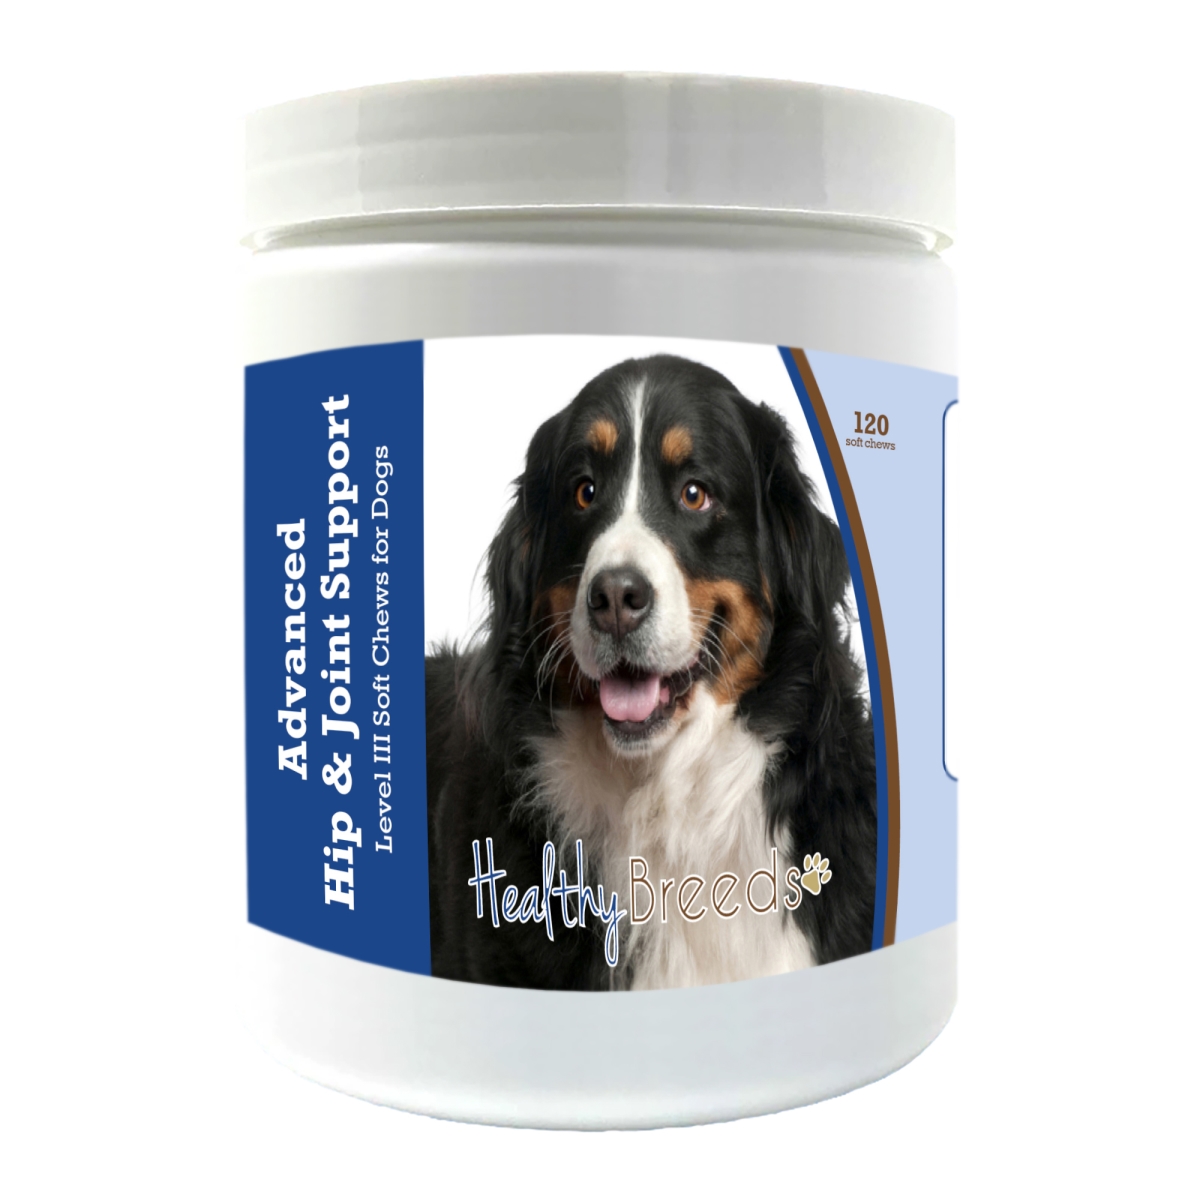 Picture of Healthy Breeds 192959897616 Bernese Mountain Dog Advanced Hip & Joint Support Level III Soft Chews for Dogs